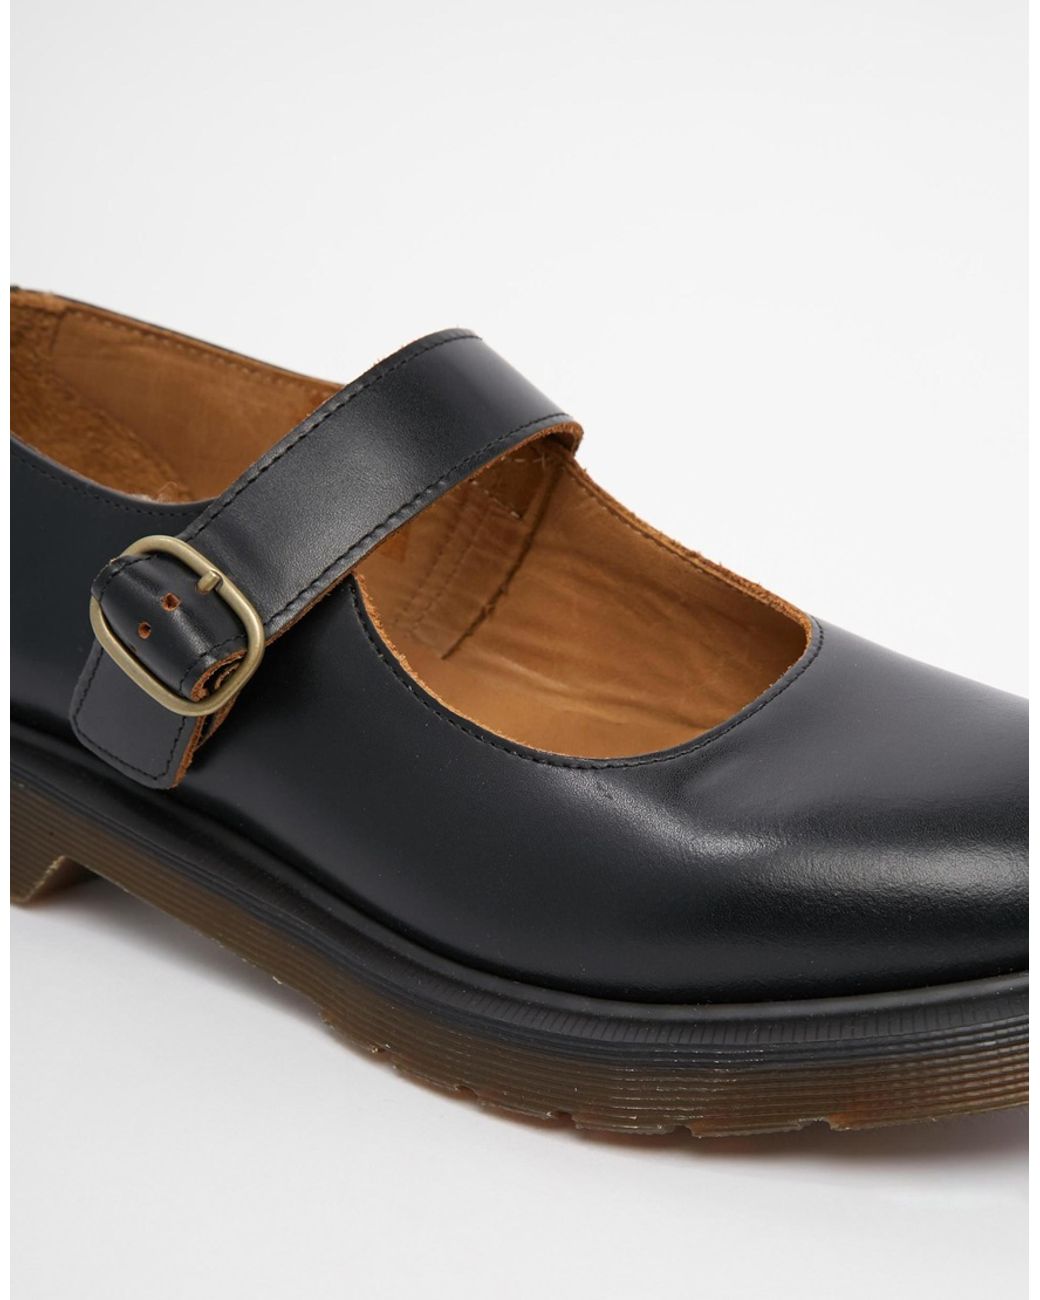 Dr. Martens Archive Indica Mary Jane Flat Shoes in Black | Lyst